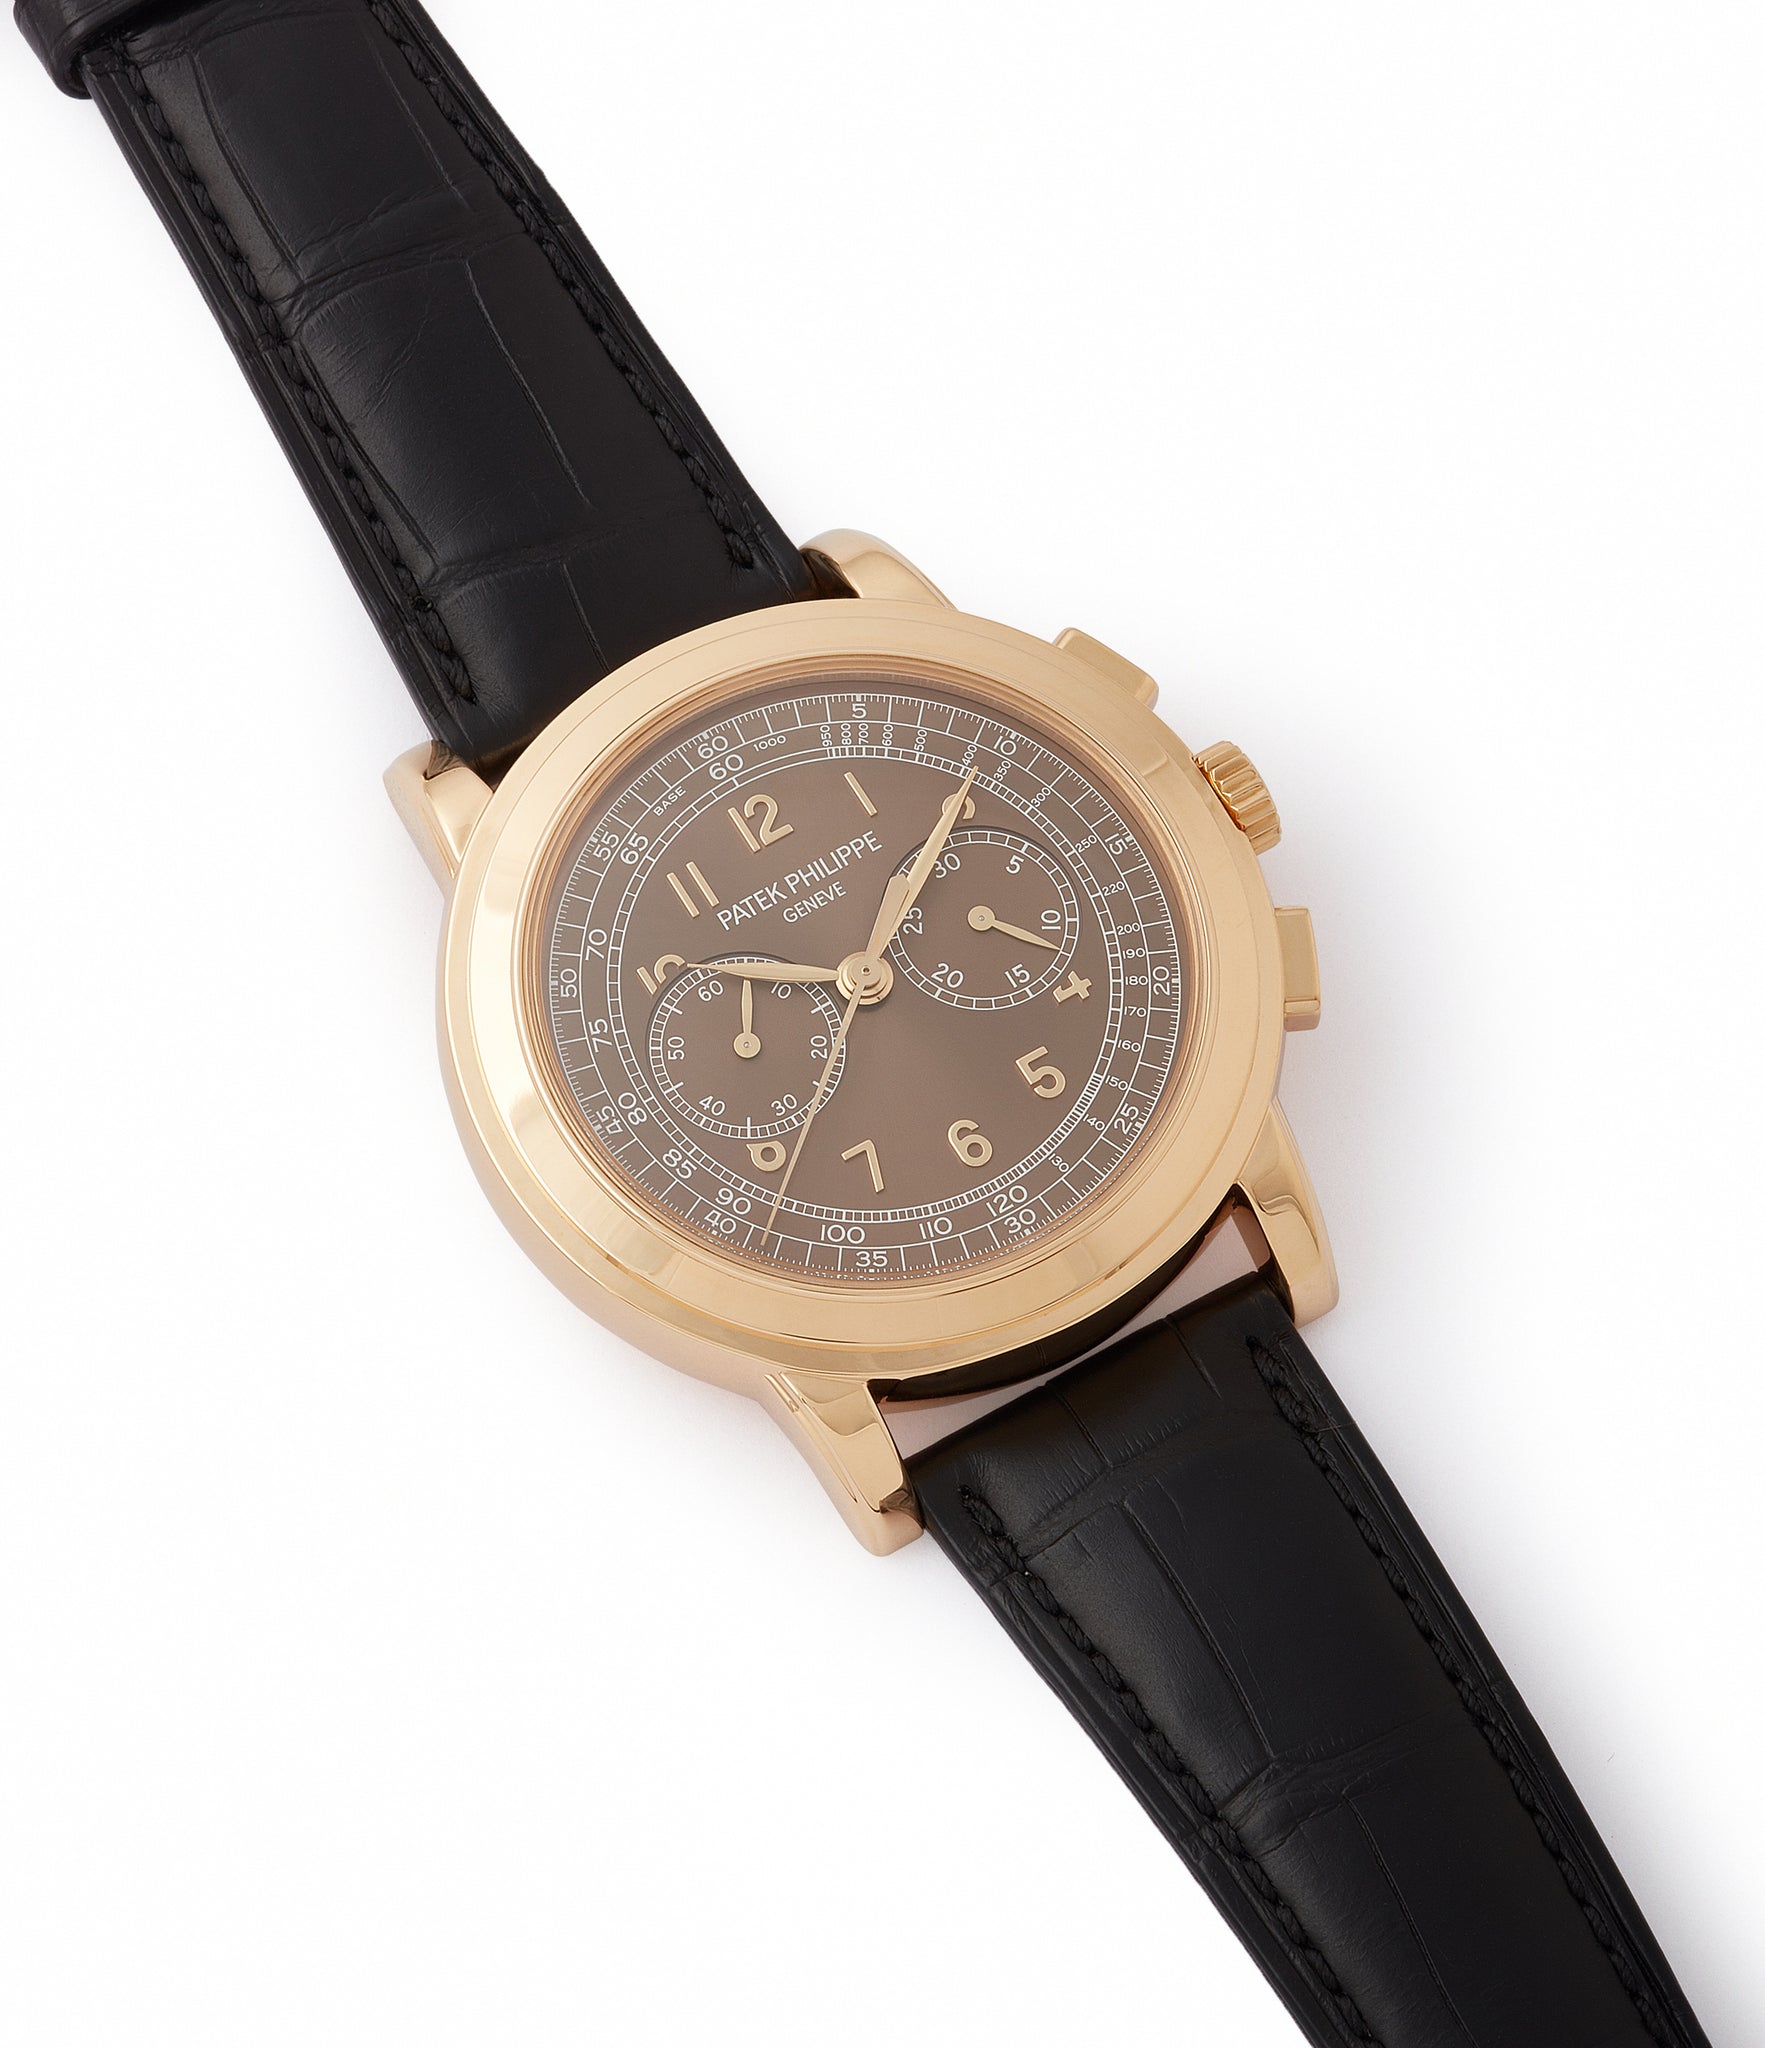 selling pre-owned Patek Philippe 5070J-012 Saatchi Edition Chronograph yellow gold watch for sale online at A Collected Man London UK specialist of rare watches